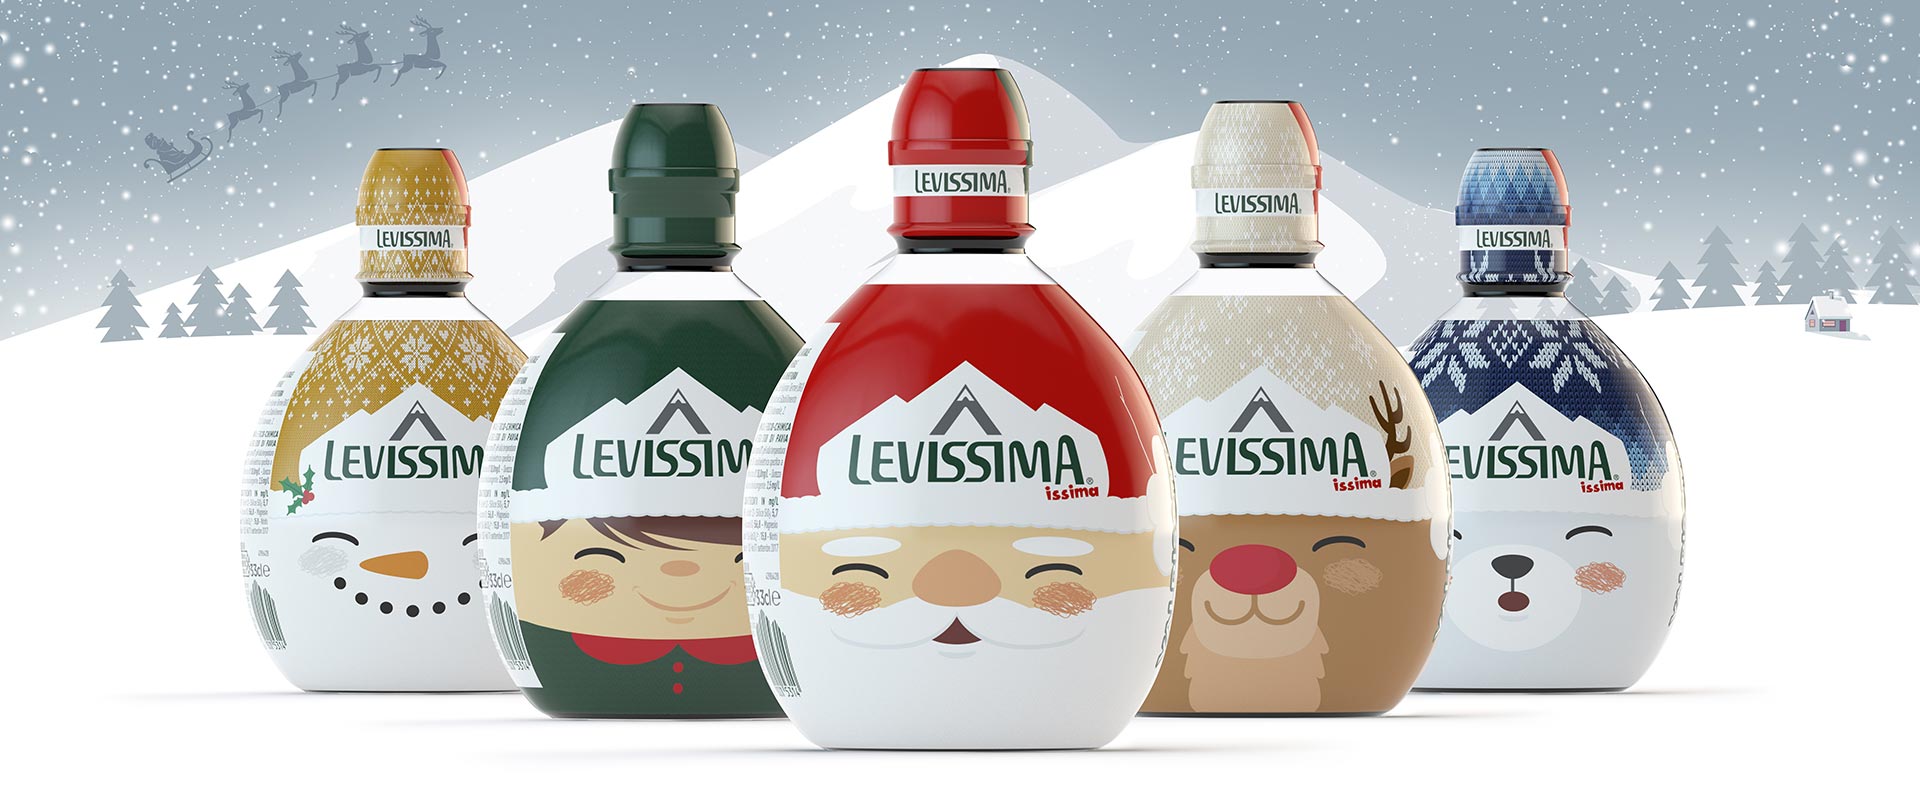 Levissima Issima, special edition for Christmas